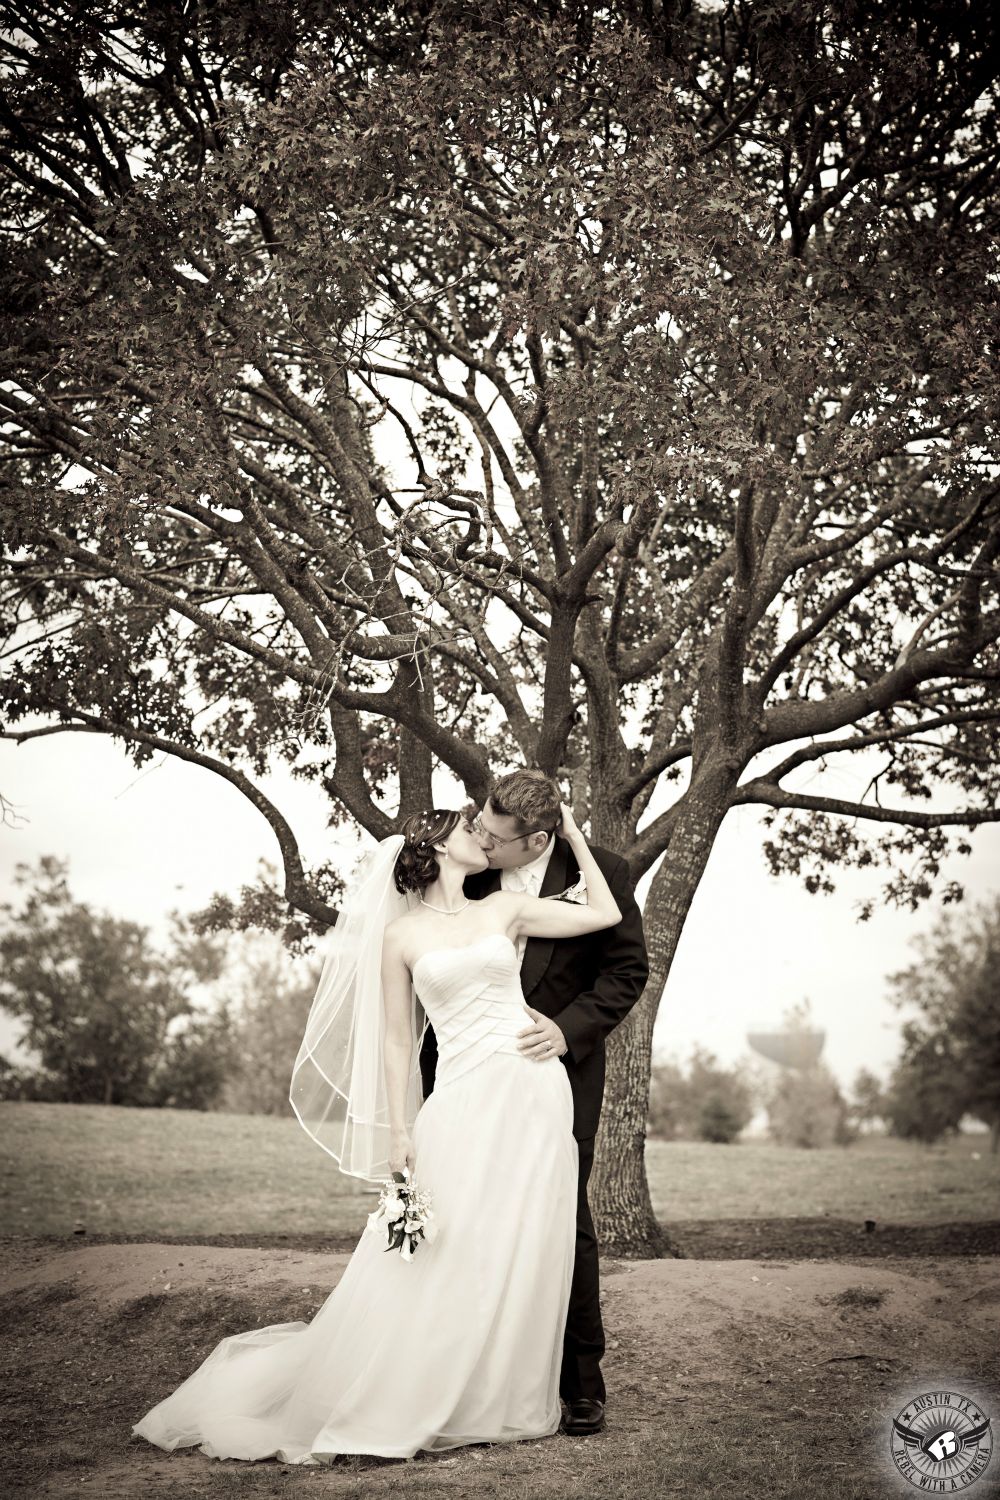 Bride and groom kiss passionately in front of beautiful tree on their wedding day at Mueller Lake Park in Austin, Texas.